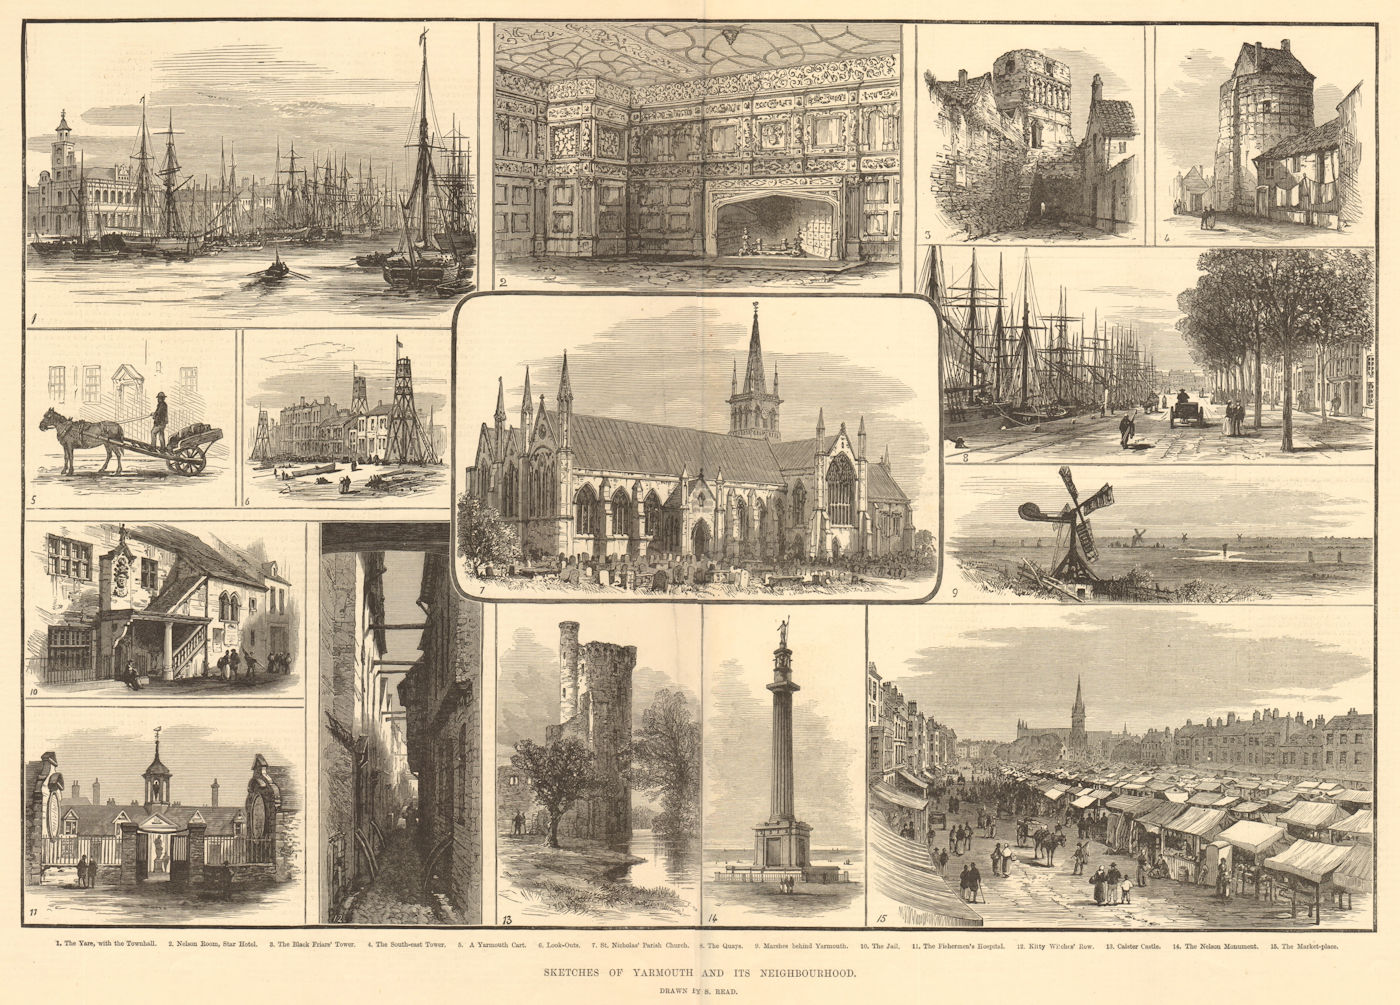 Associate Product Sketches of Yarmouth & its neighbourhood. Drawn by S. Read. Norfolk 1882